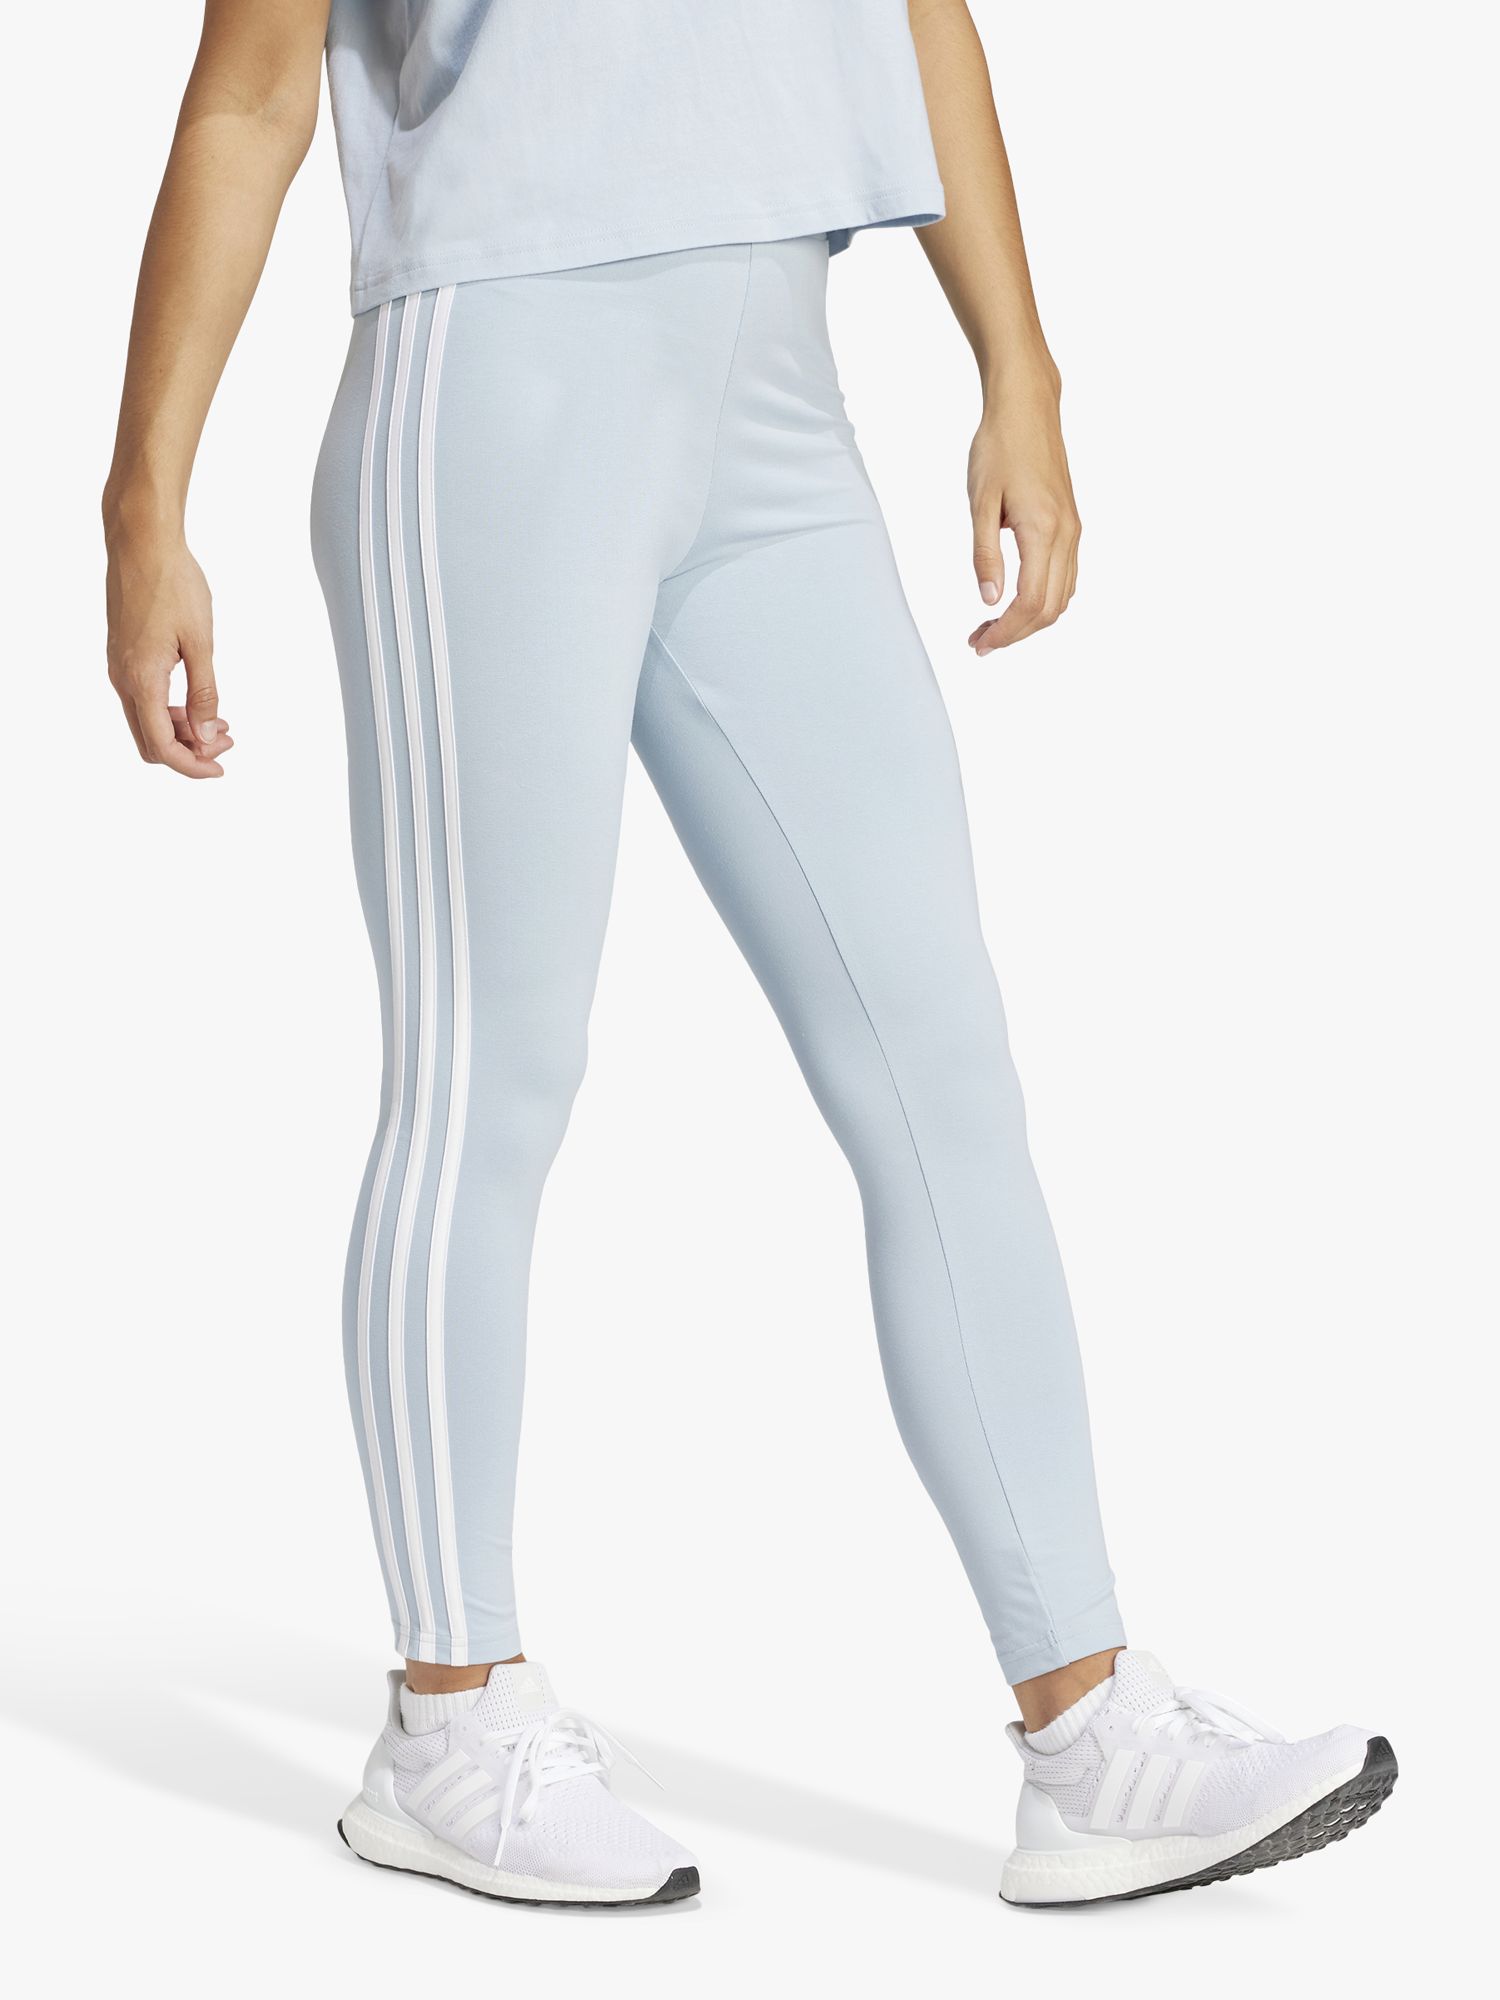 adidas Essentials 3 Stripes High Wasisted Jersey Leggings, Blue, L